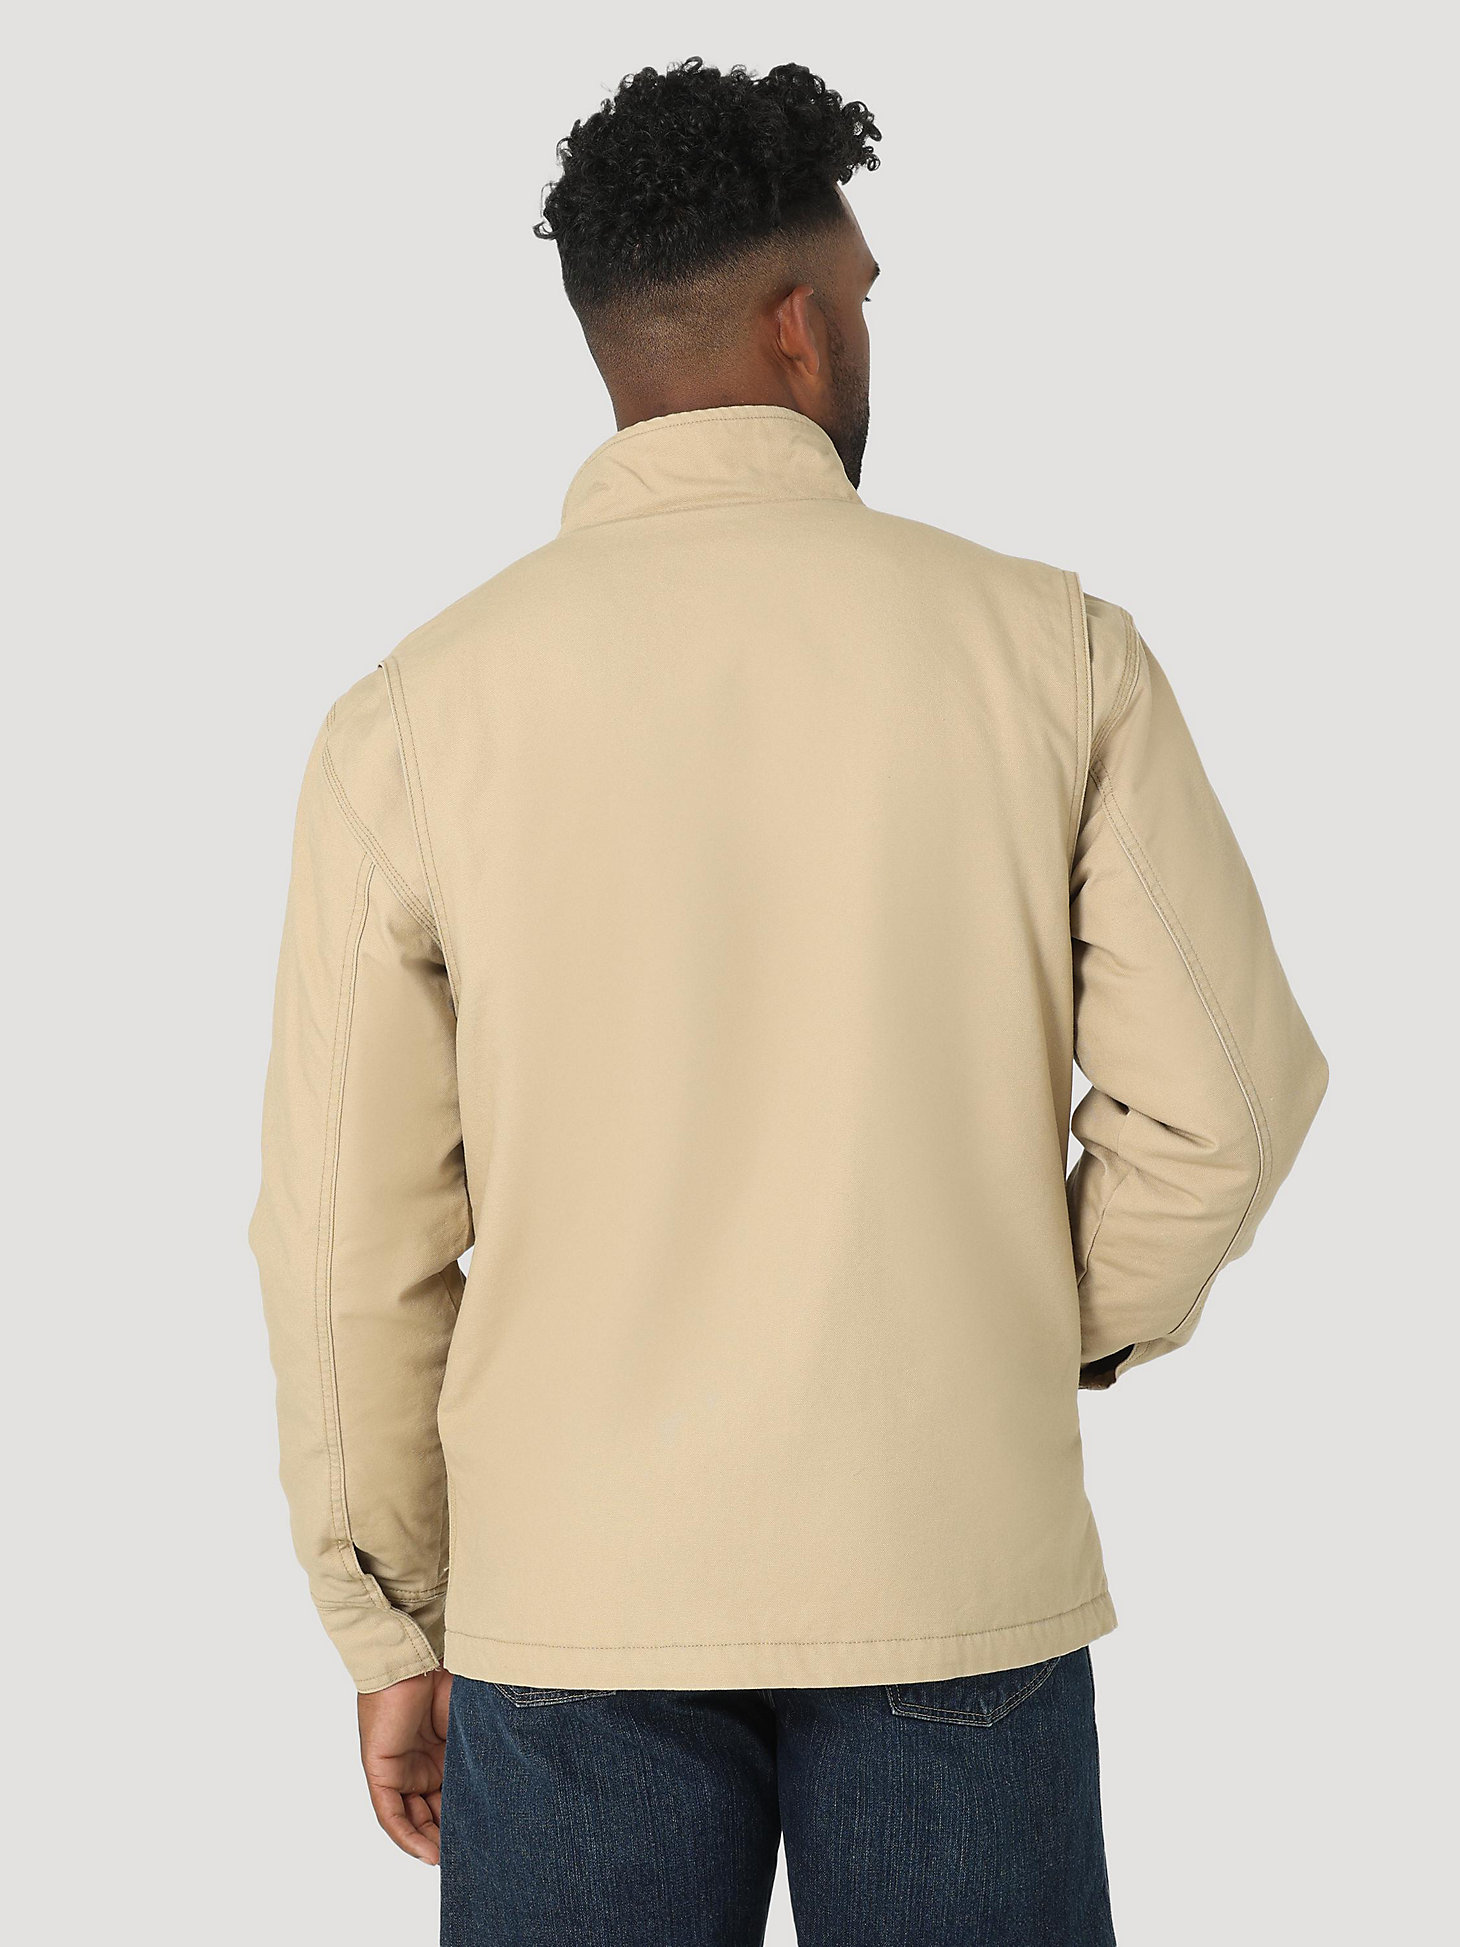 RIGGS Tough Layers Sherpa Lined Canvas Jacket in Golden Khaki alternative view 2